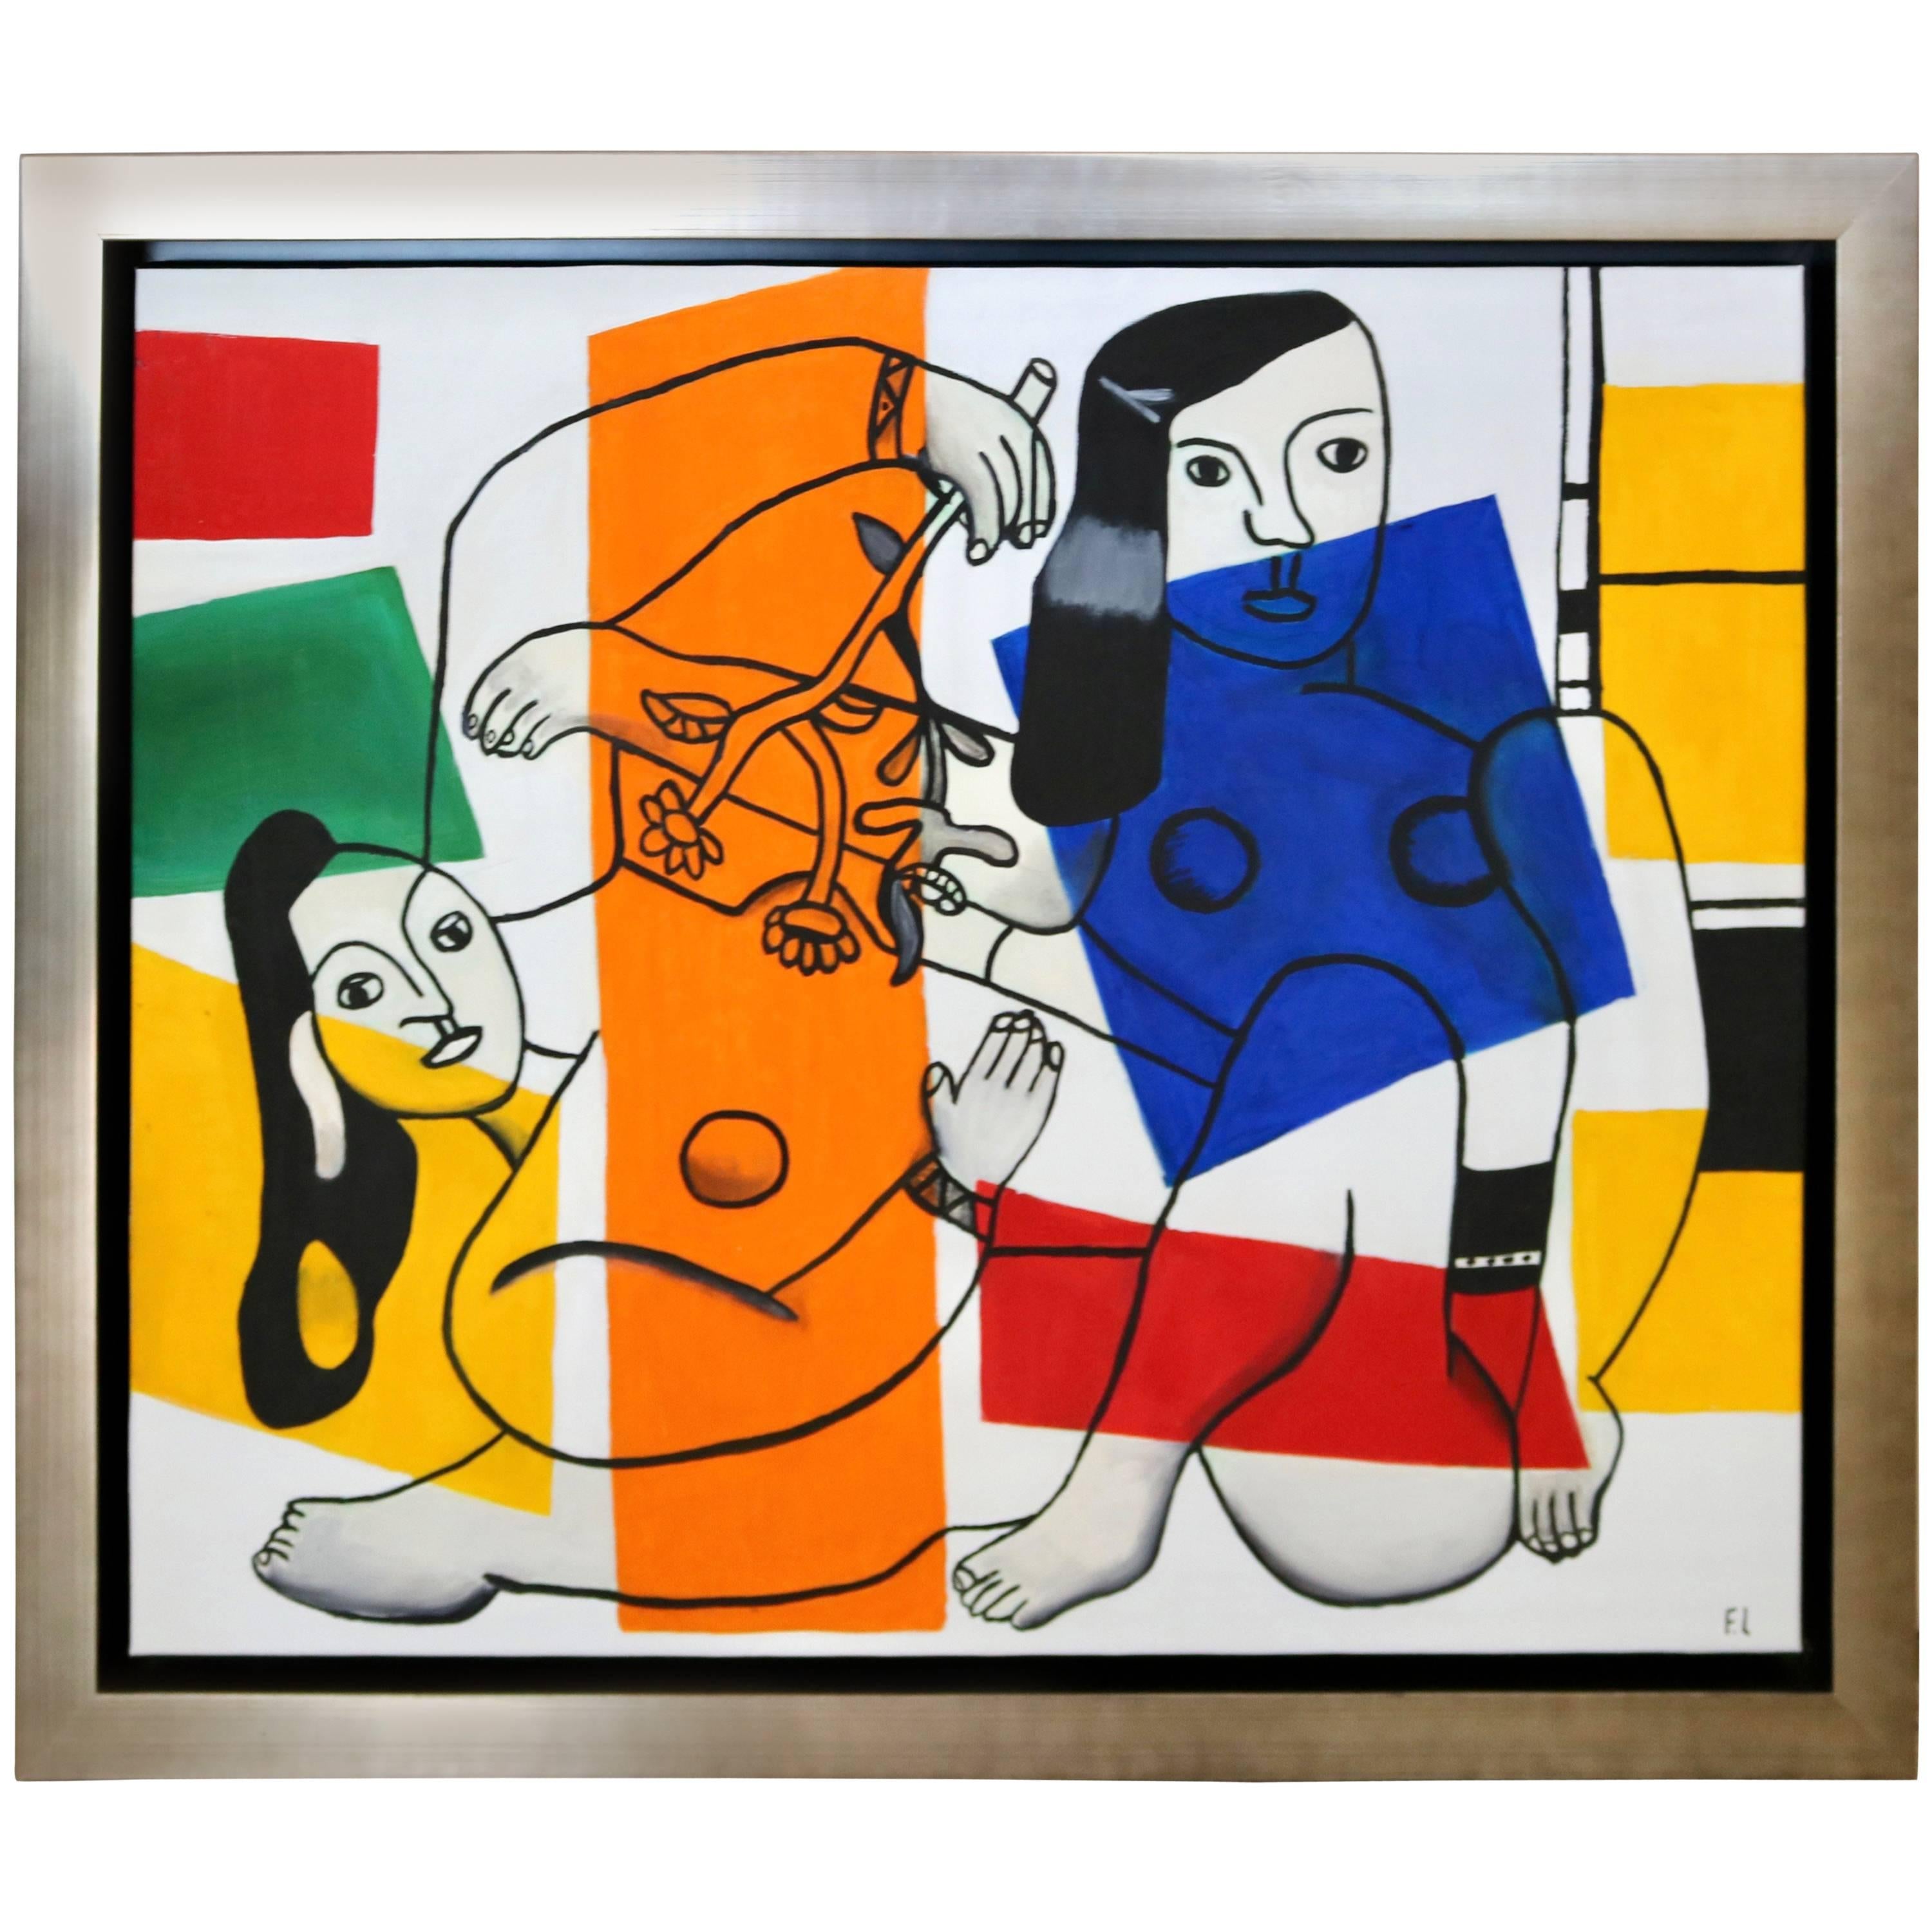 Homage to Fernand Leger Oil on Canvas, Cubist Style Painting